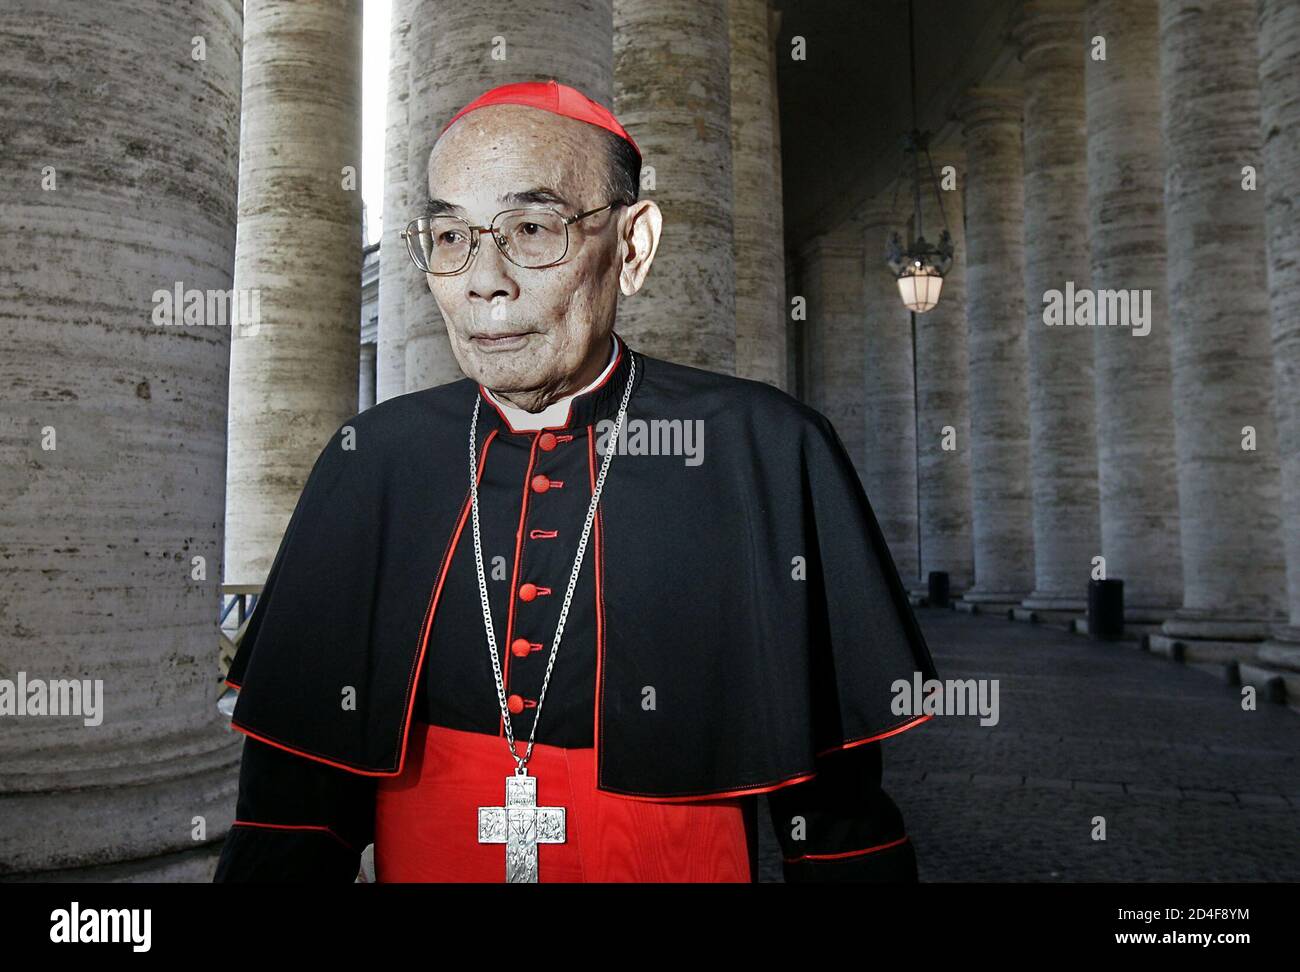 Thai Cardinal Michael Mitchai Kitbunchu arrives for the general congregation meeting in City April 12, Roman Catholicism's conclave to elect the new Pope will start at 4:30 (1430 GMT) next